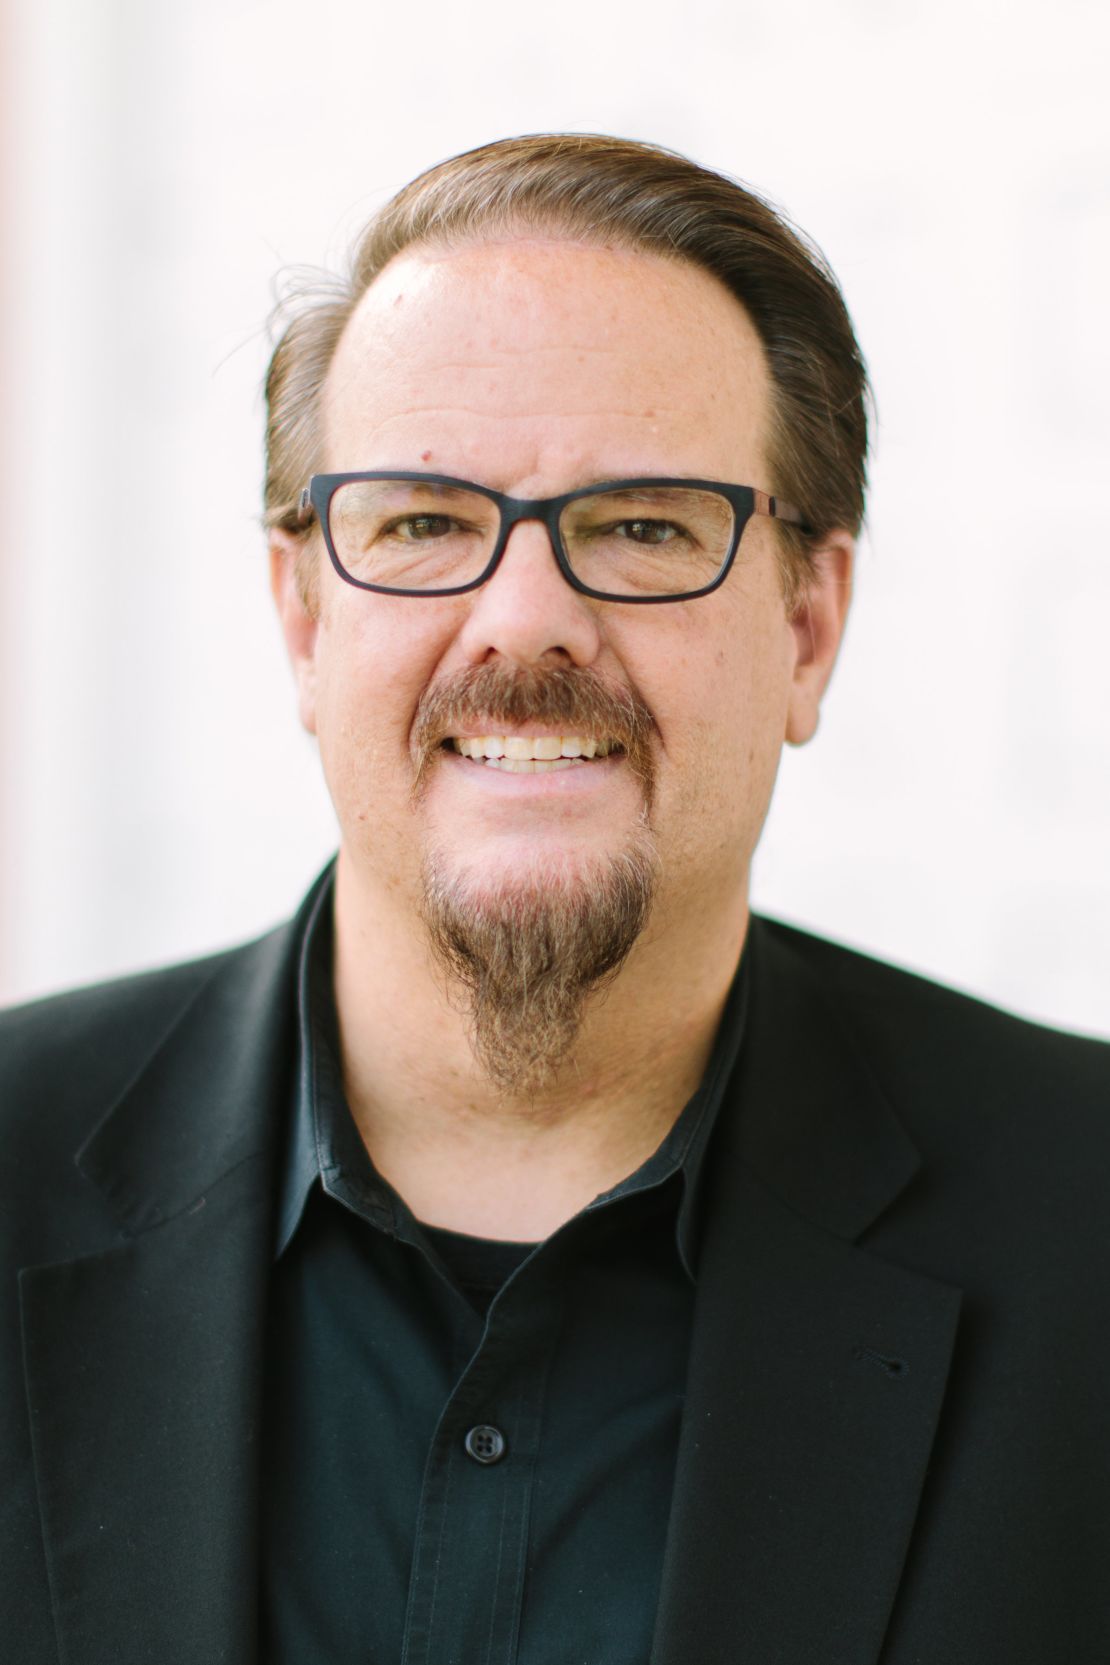 Ed Stetzer is author of the new book "Christians in the Age of Outrage." 